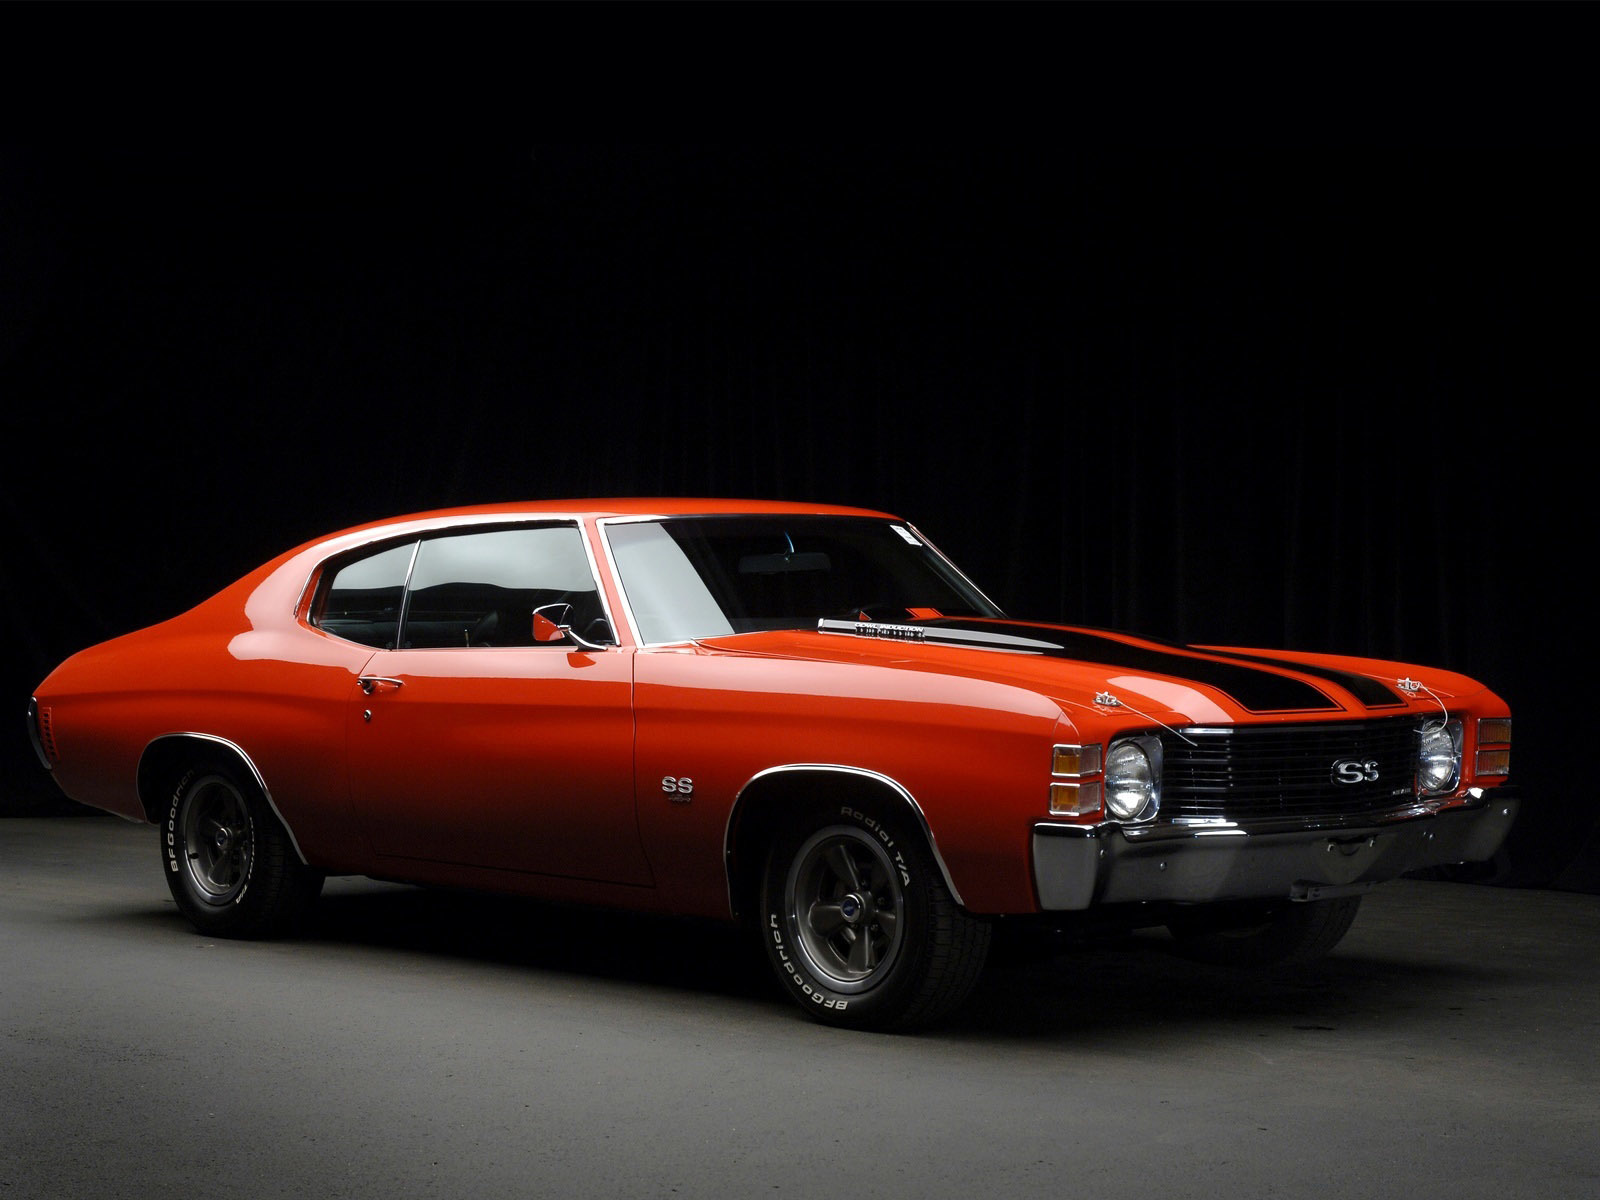 Muscle Cars Wallpapers on Muscle Cars Chevrolet Chevelle Ss Hd Wallpaper   Cars   Trucks